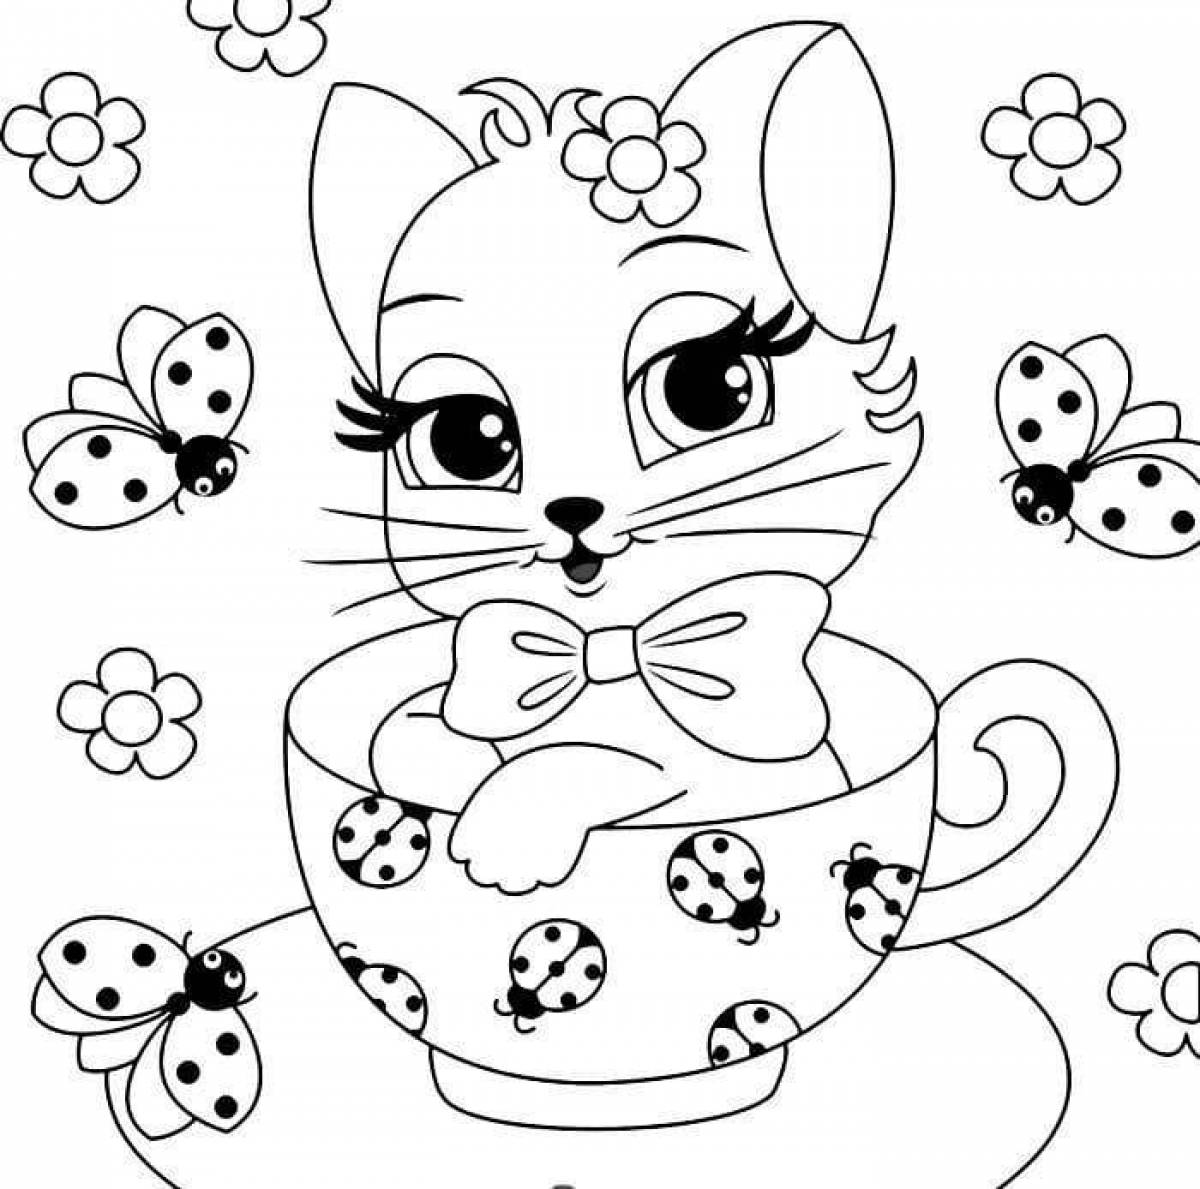 Exquisite kitty coloring book for kids 4-5 years old